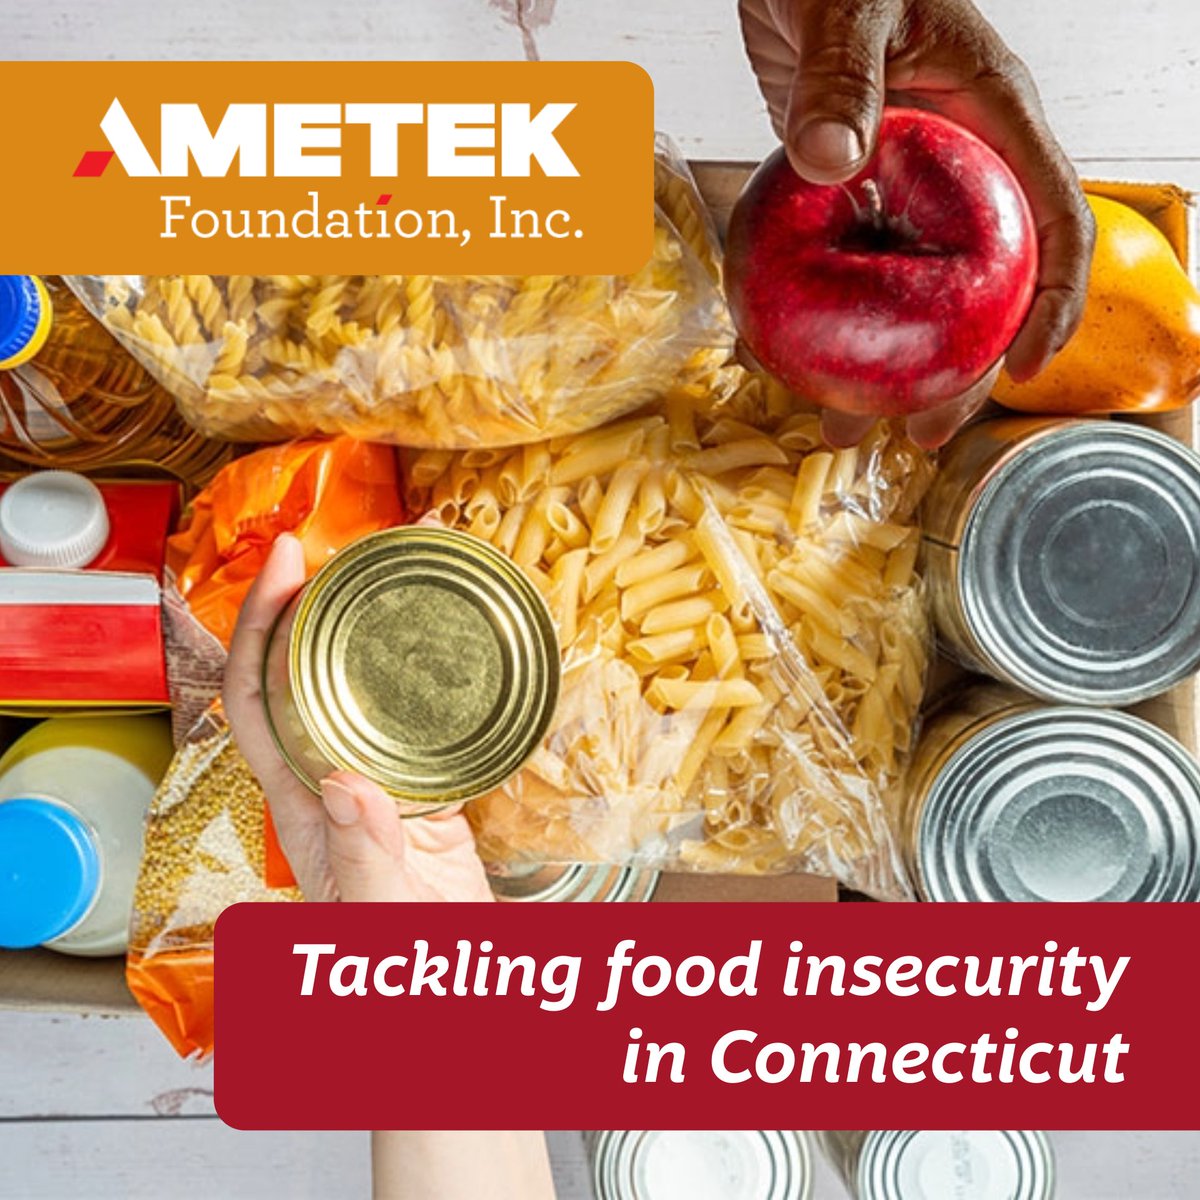 The AMETEK Foundation supports initiatives that deliver millions of meals to those in need. In matching the contributions of the @ametek_hkp team, the Foundation has supported @CTFoodshare in its efforts to tackle food insecurity in the area. Learn more: ametek.com/our-stories/st…